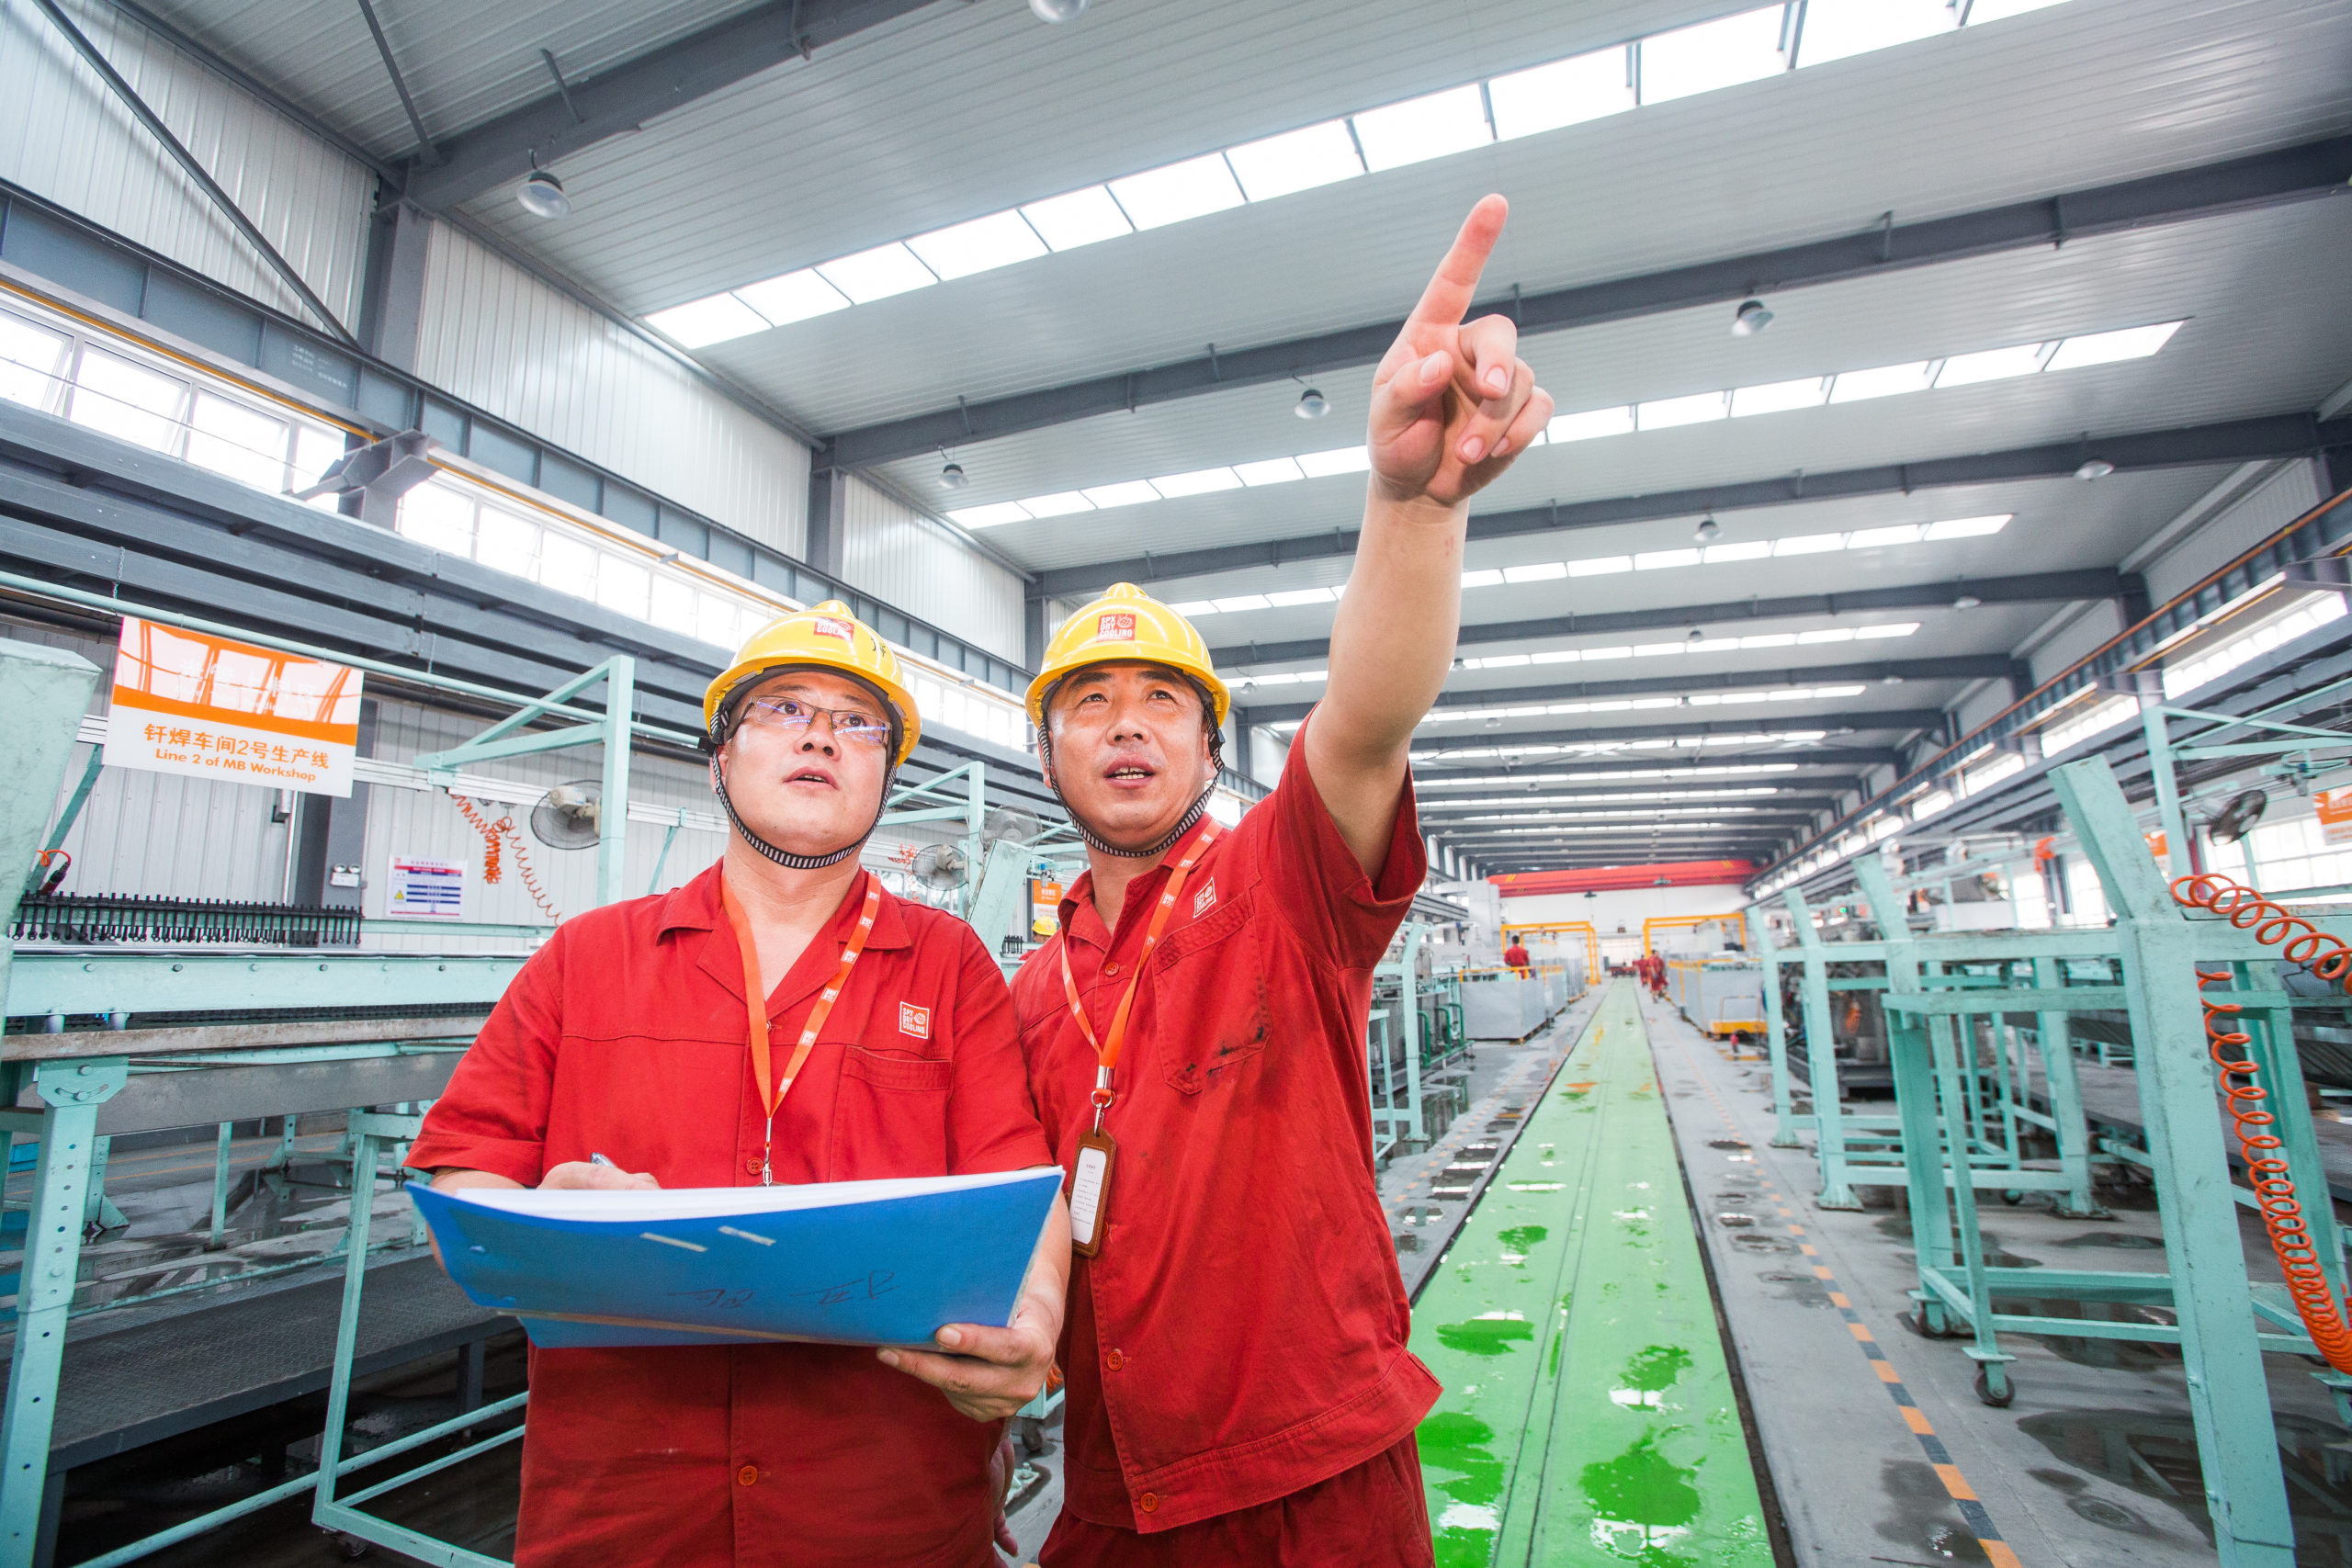 Third production line in manufacturing plant China, two employees working